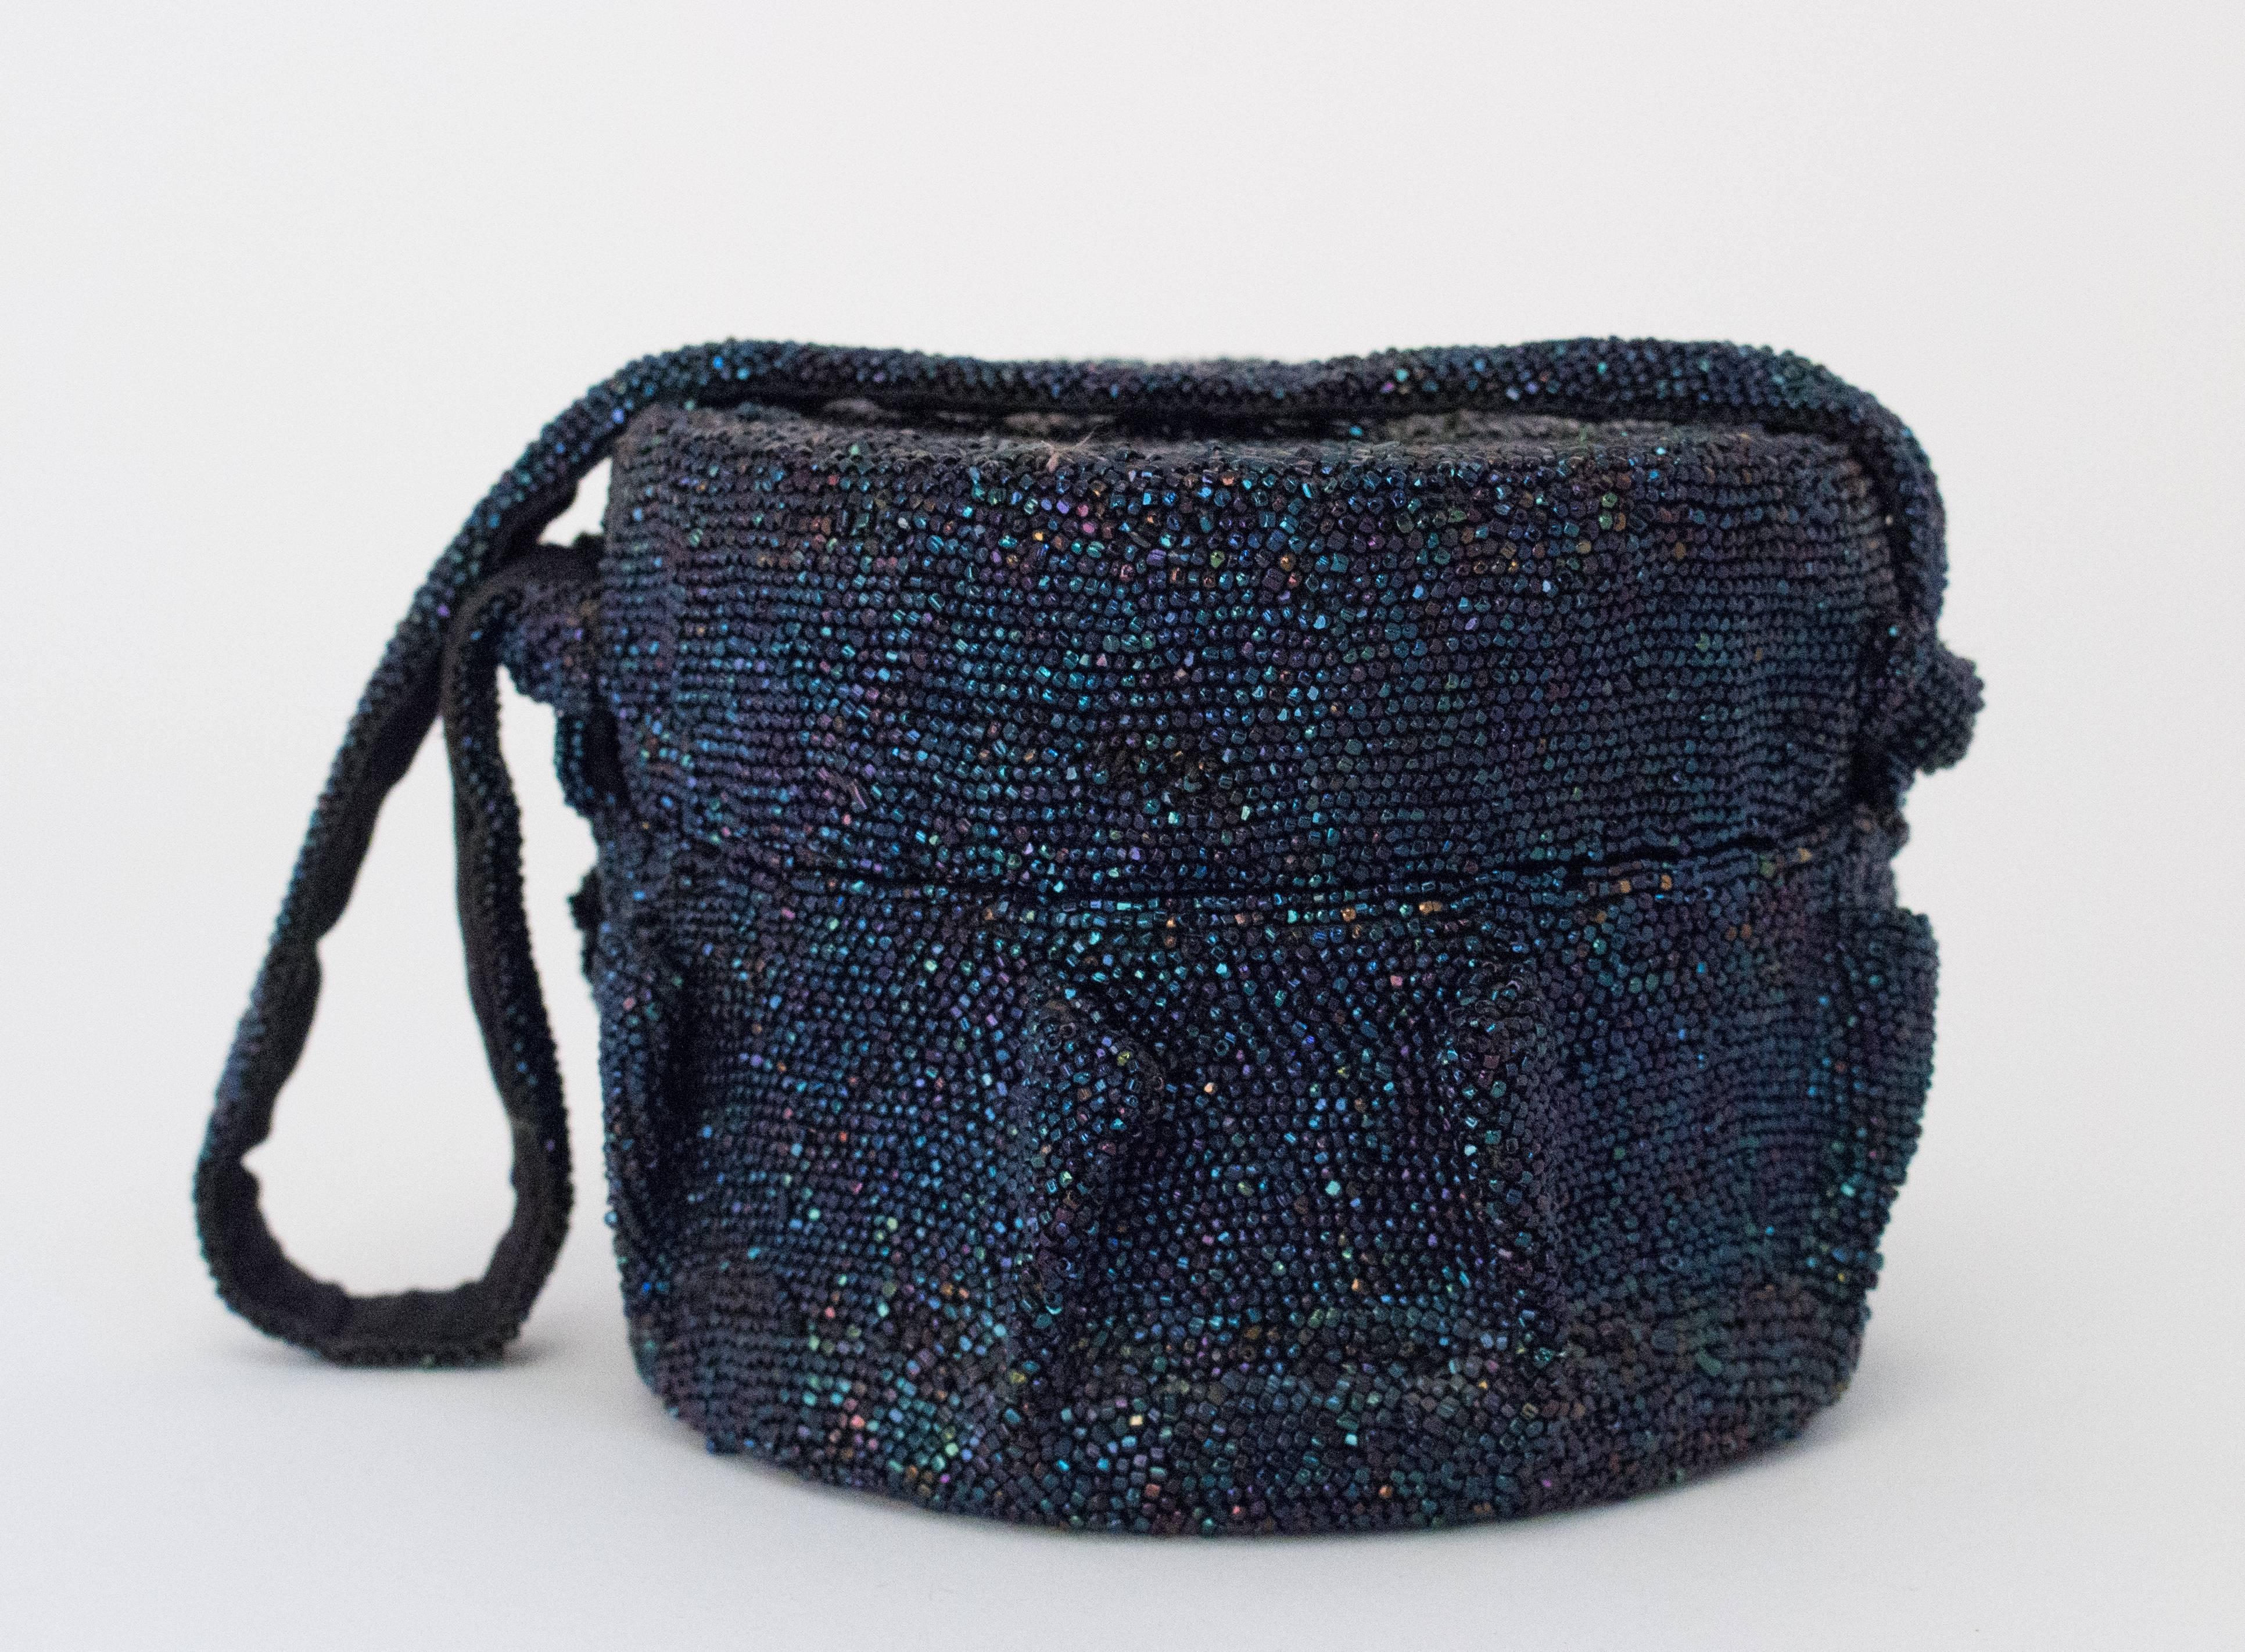 40s Blue Iridescent Round Beaded Handbag. Lined. 

Measurements:
Height: 4 1/2 inches
Circumference: 19 inches 
Strap: 18 1/2 inches 